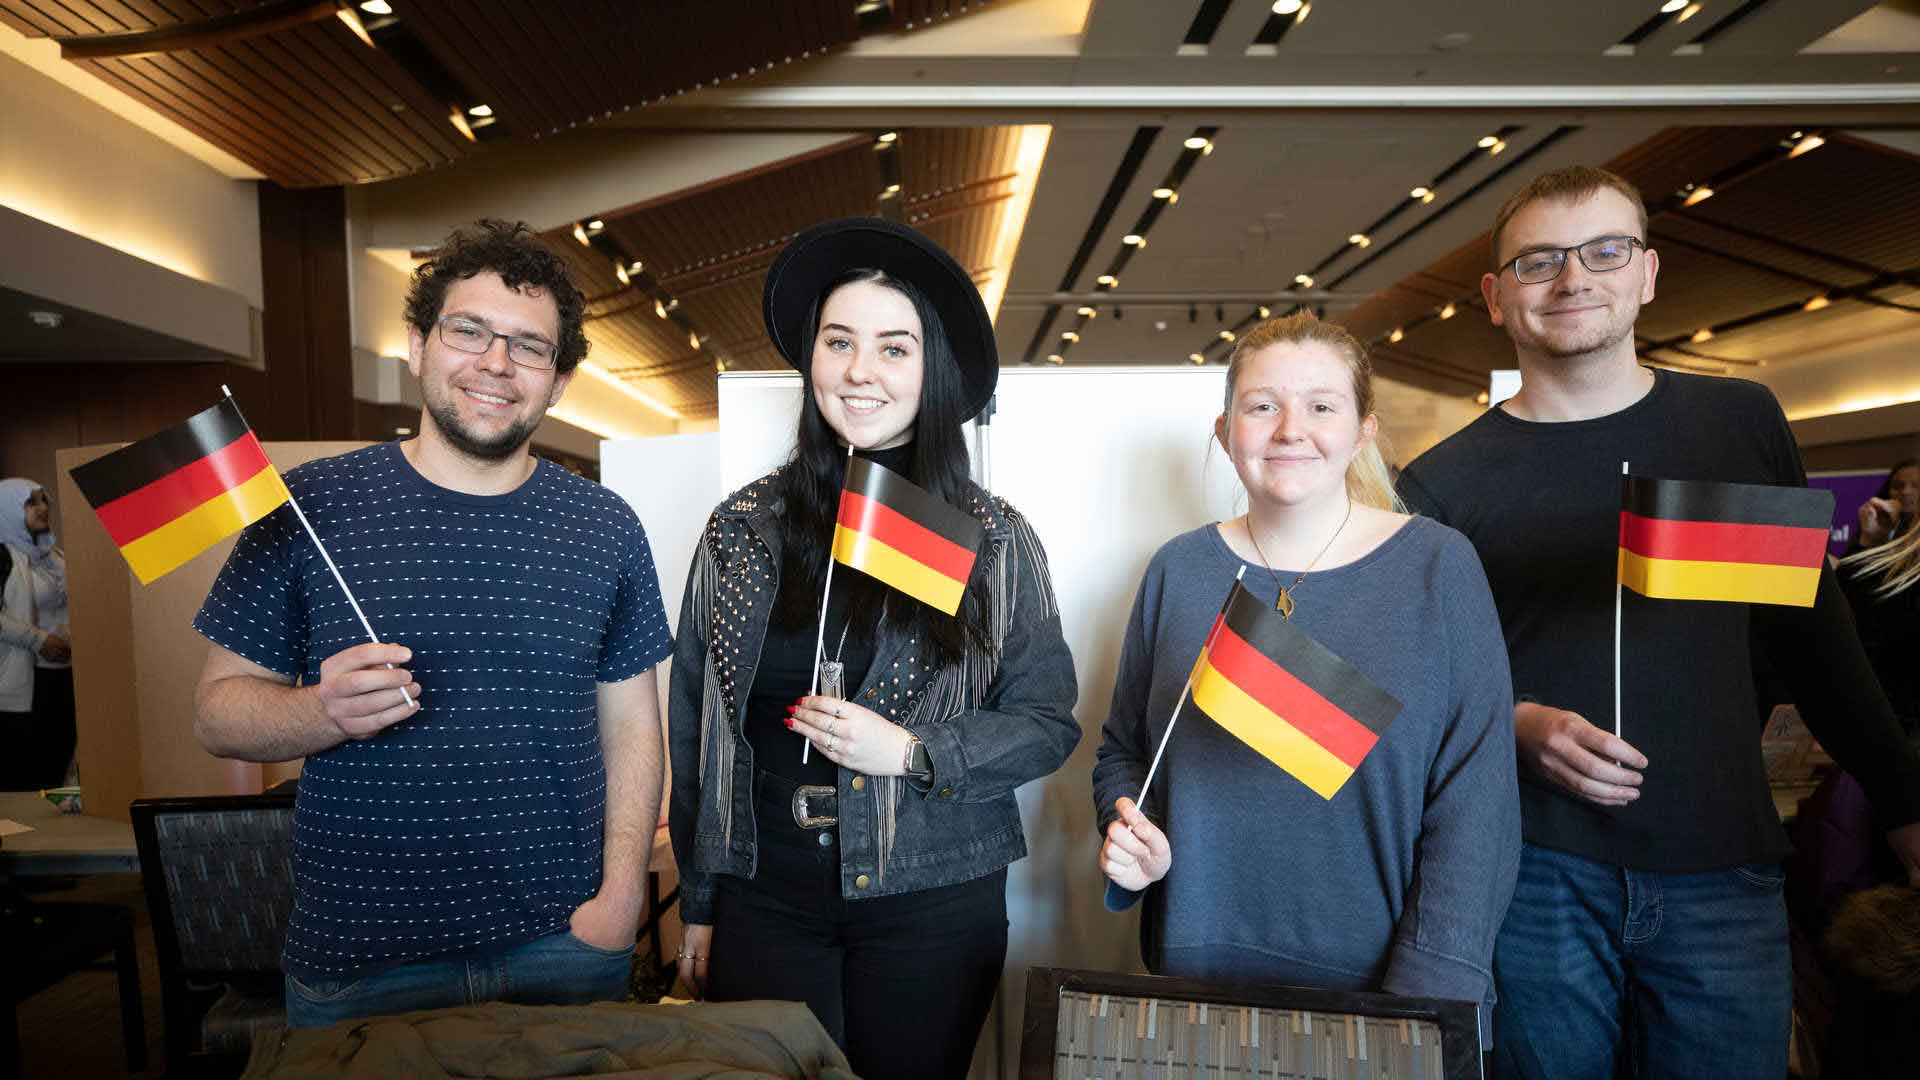 Members of the German Club pose with mini German flags at the annual involvement fair.